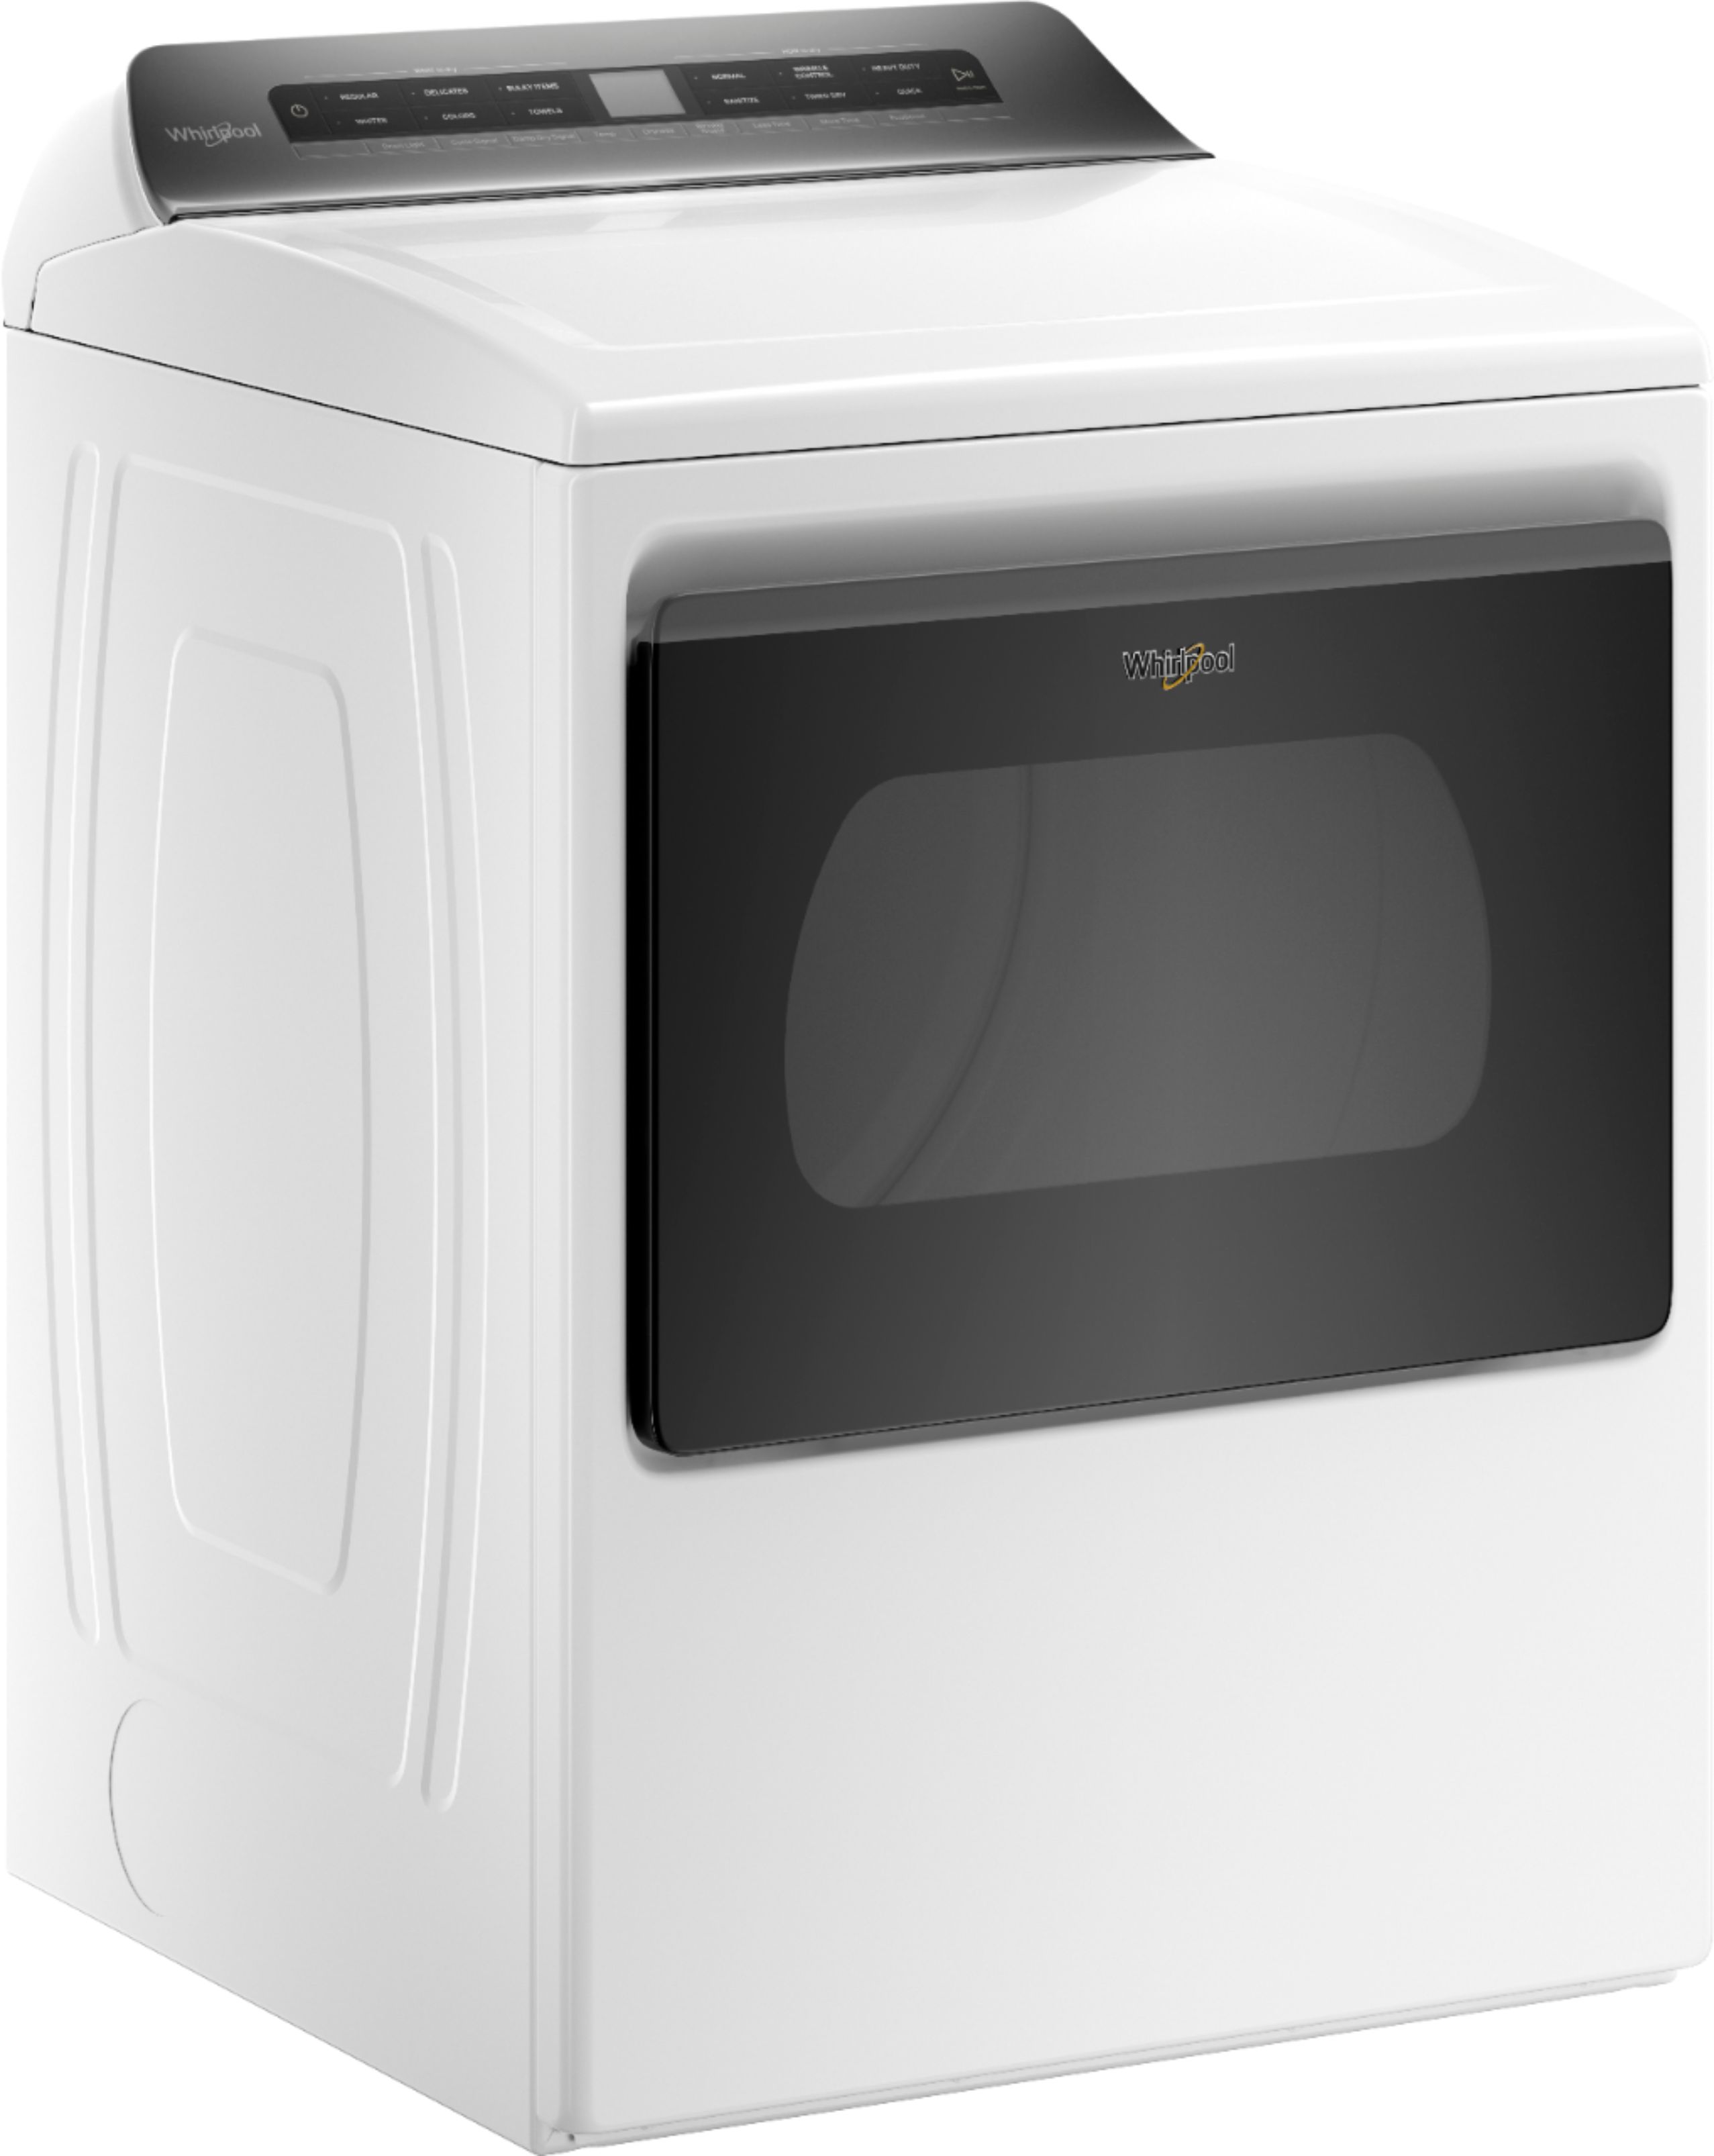 Angle View: Whirlpool - 7.4 Cu. Ft. Electric Dryer with AccuDry Sensor Drying Technology - White